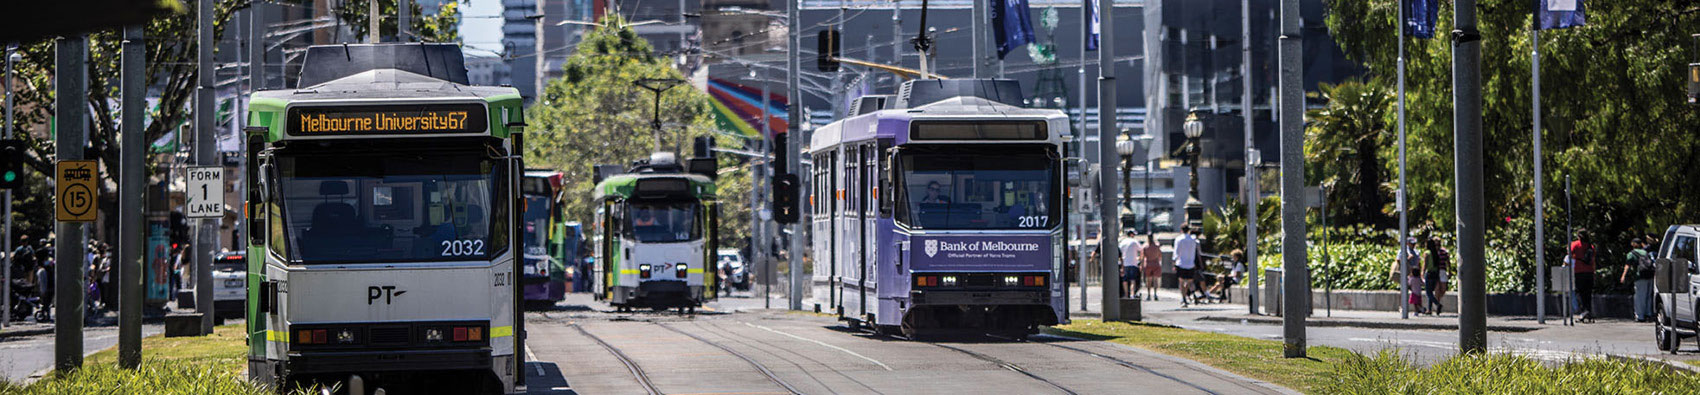 Four trams on tram lines in the city.